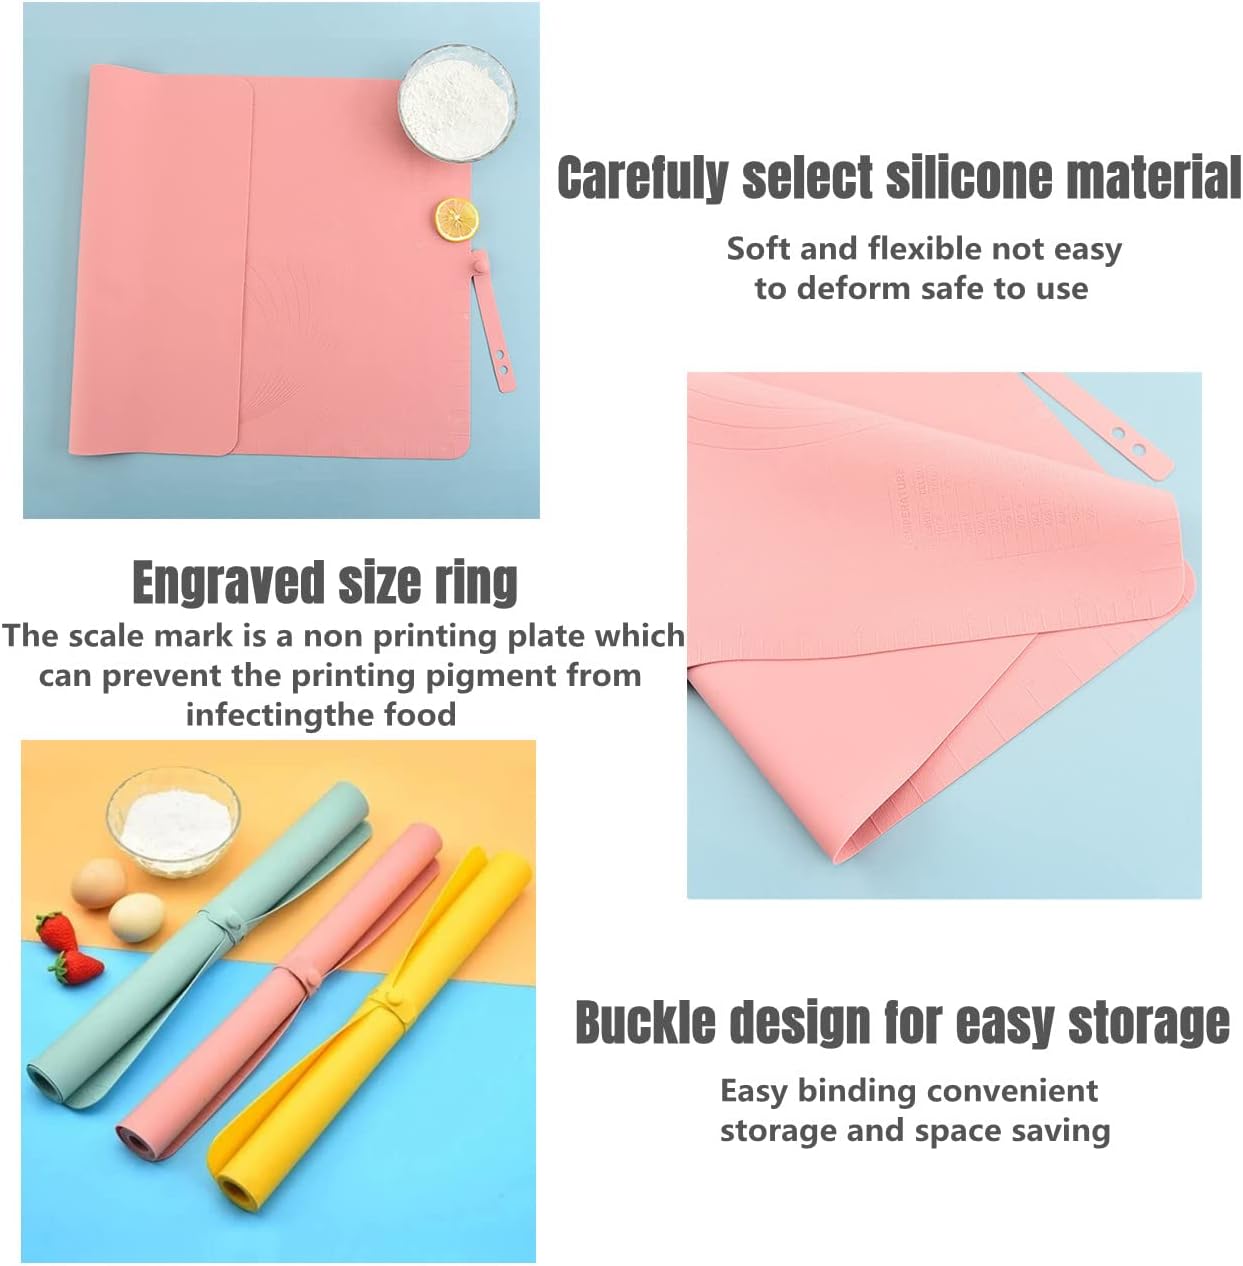 Extra Large Silicone Baking Mat Extra Large Kitchen Silicone Pad  Multifunctional Non Slip Non Stick Silicone Pastry Mats Can Be Rolled up  Large Rolling Pad with Scale Size Reusable (1PC-Pink) 